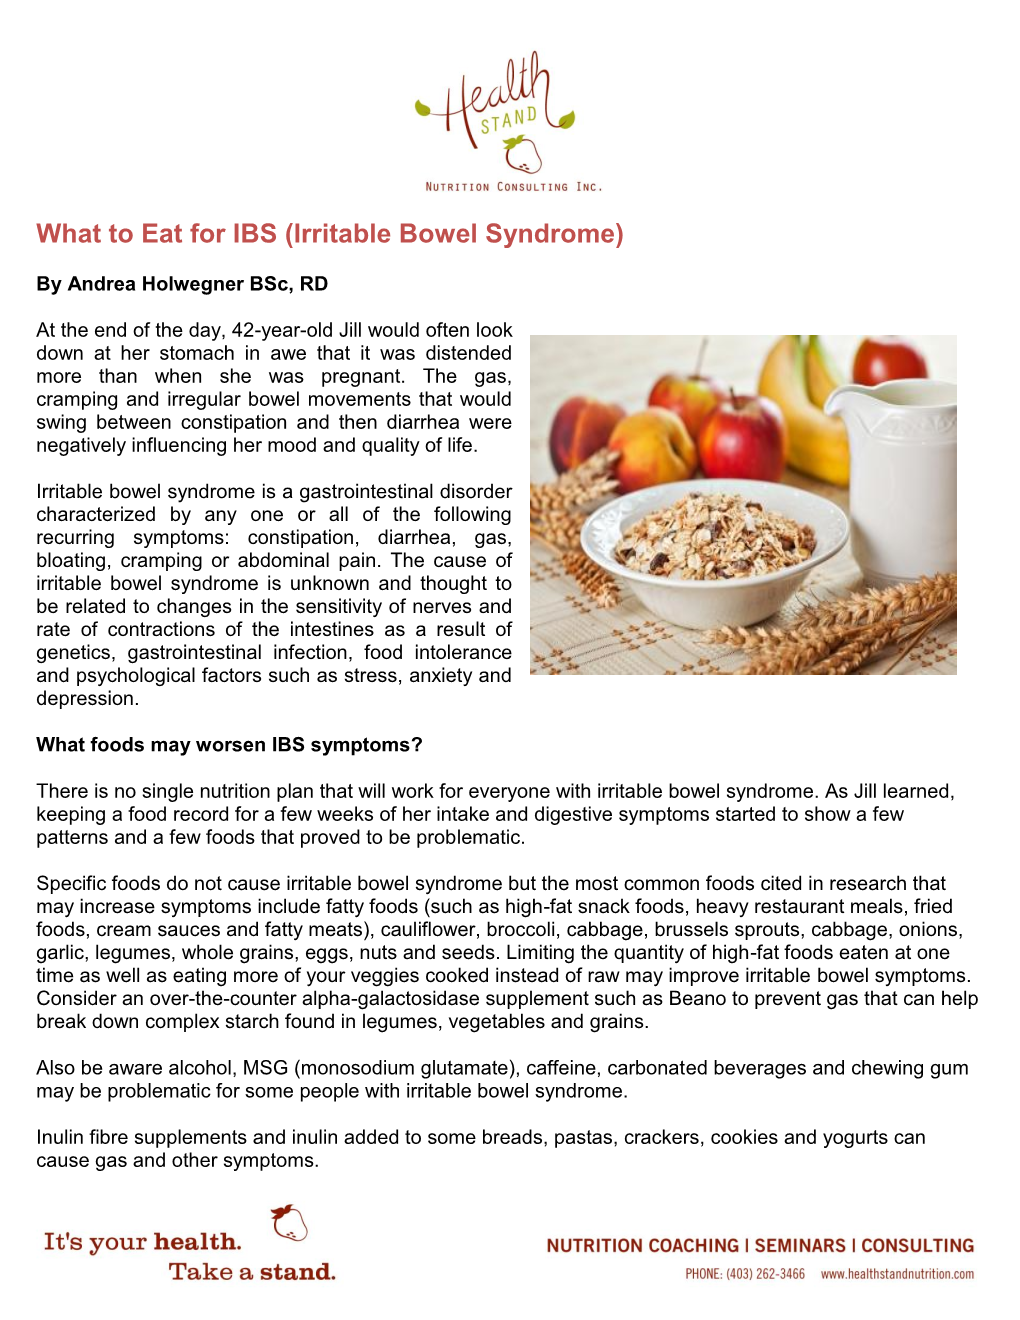 What to Eat for IBS (Irritable Bowel Syndrome)